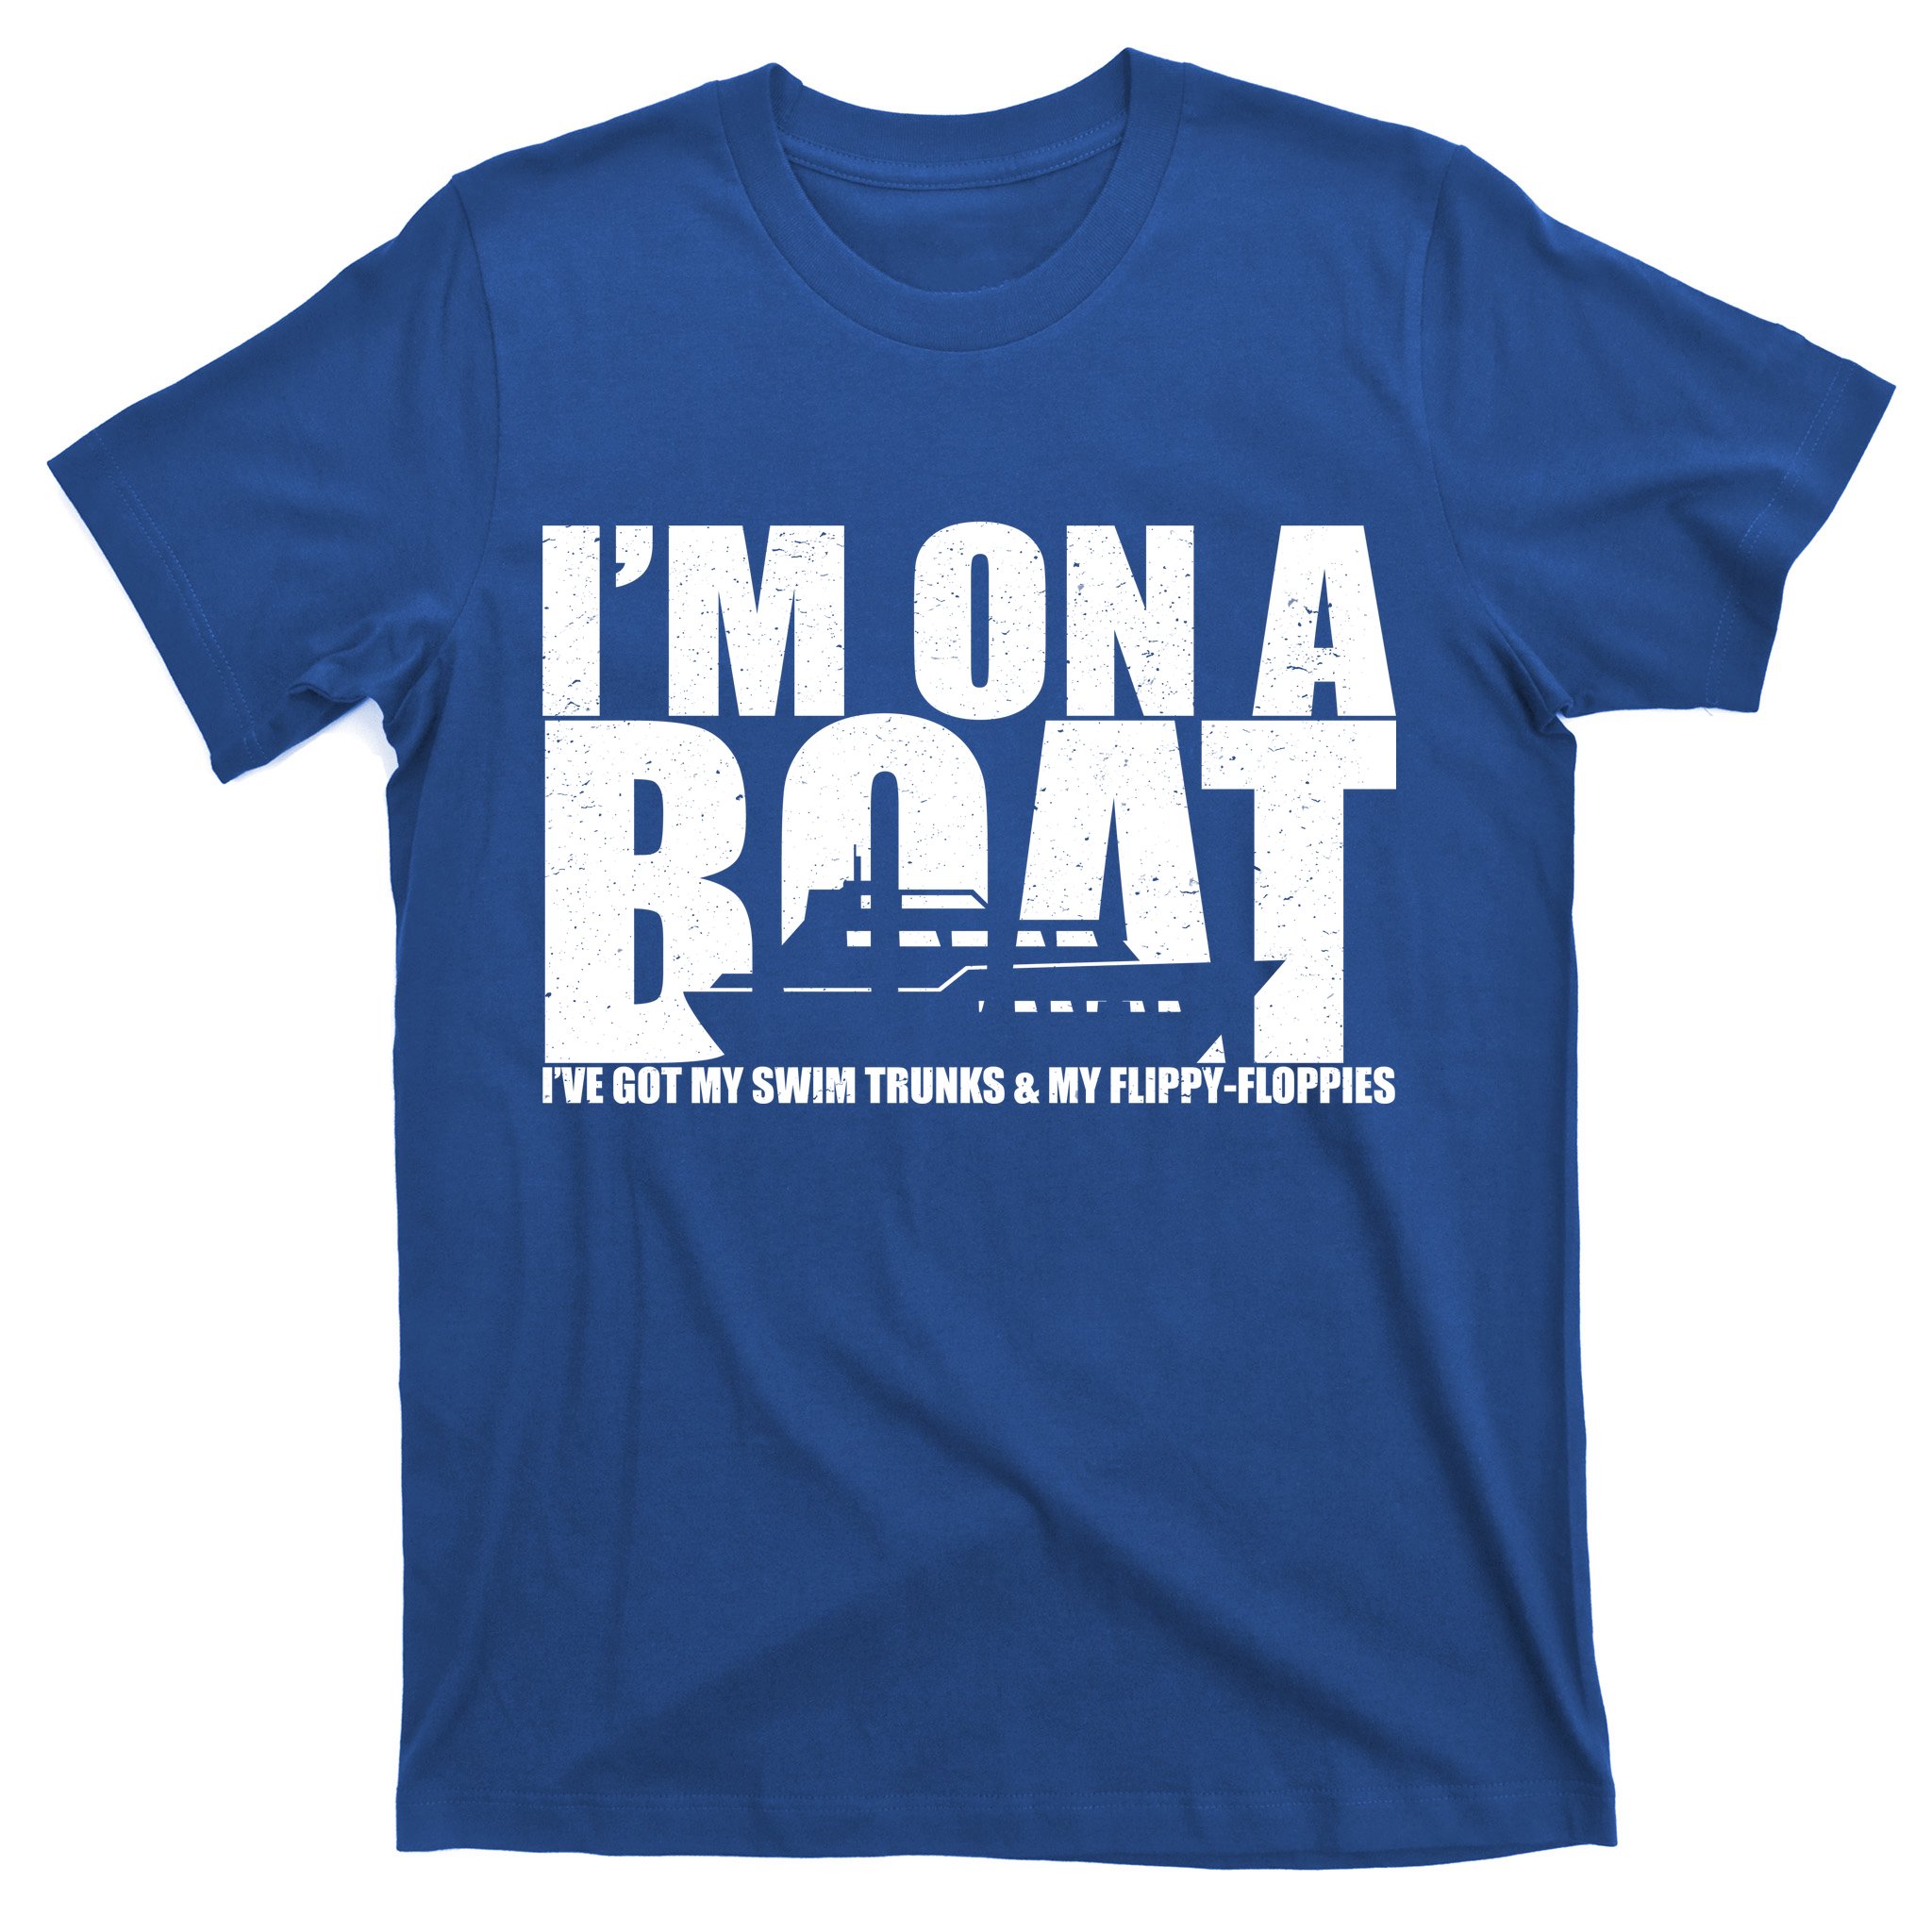 Love Boat TV Show ORIGINAL BOOZE CRUISE Licensed T-Shirt All Sizes 